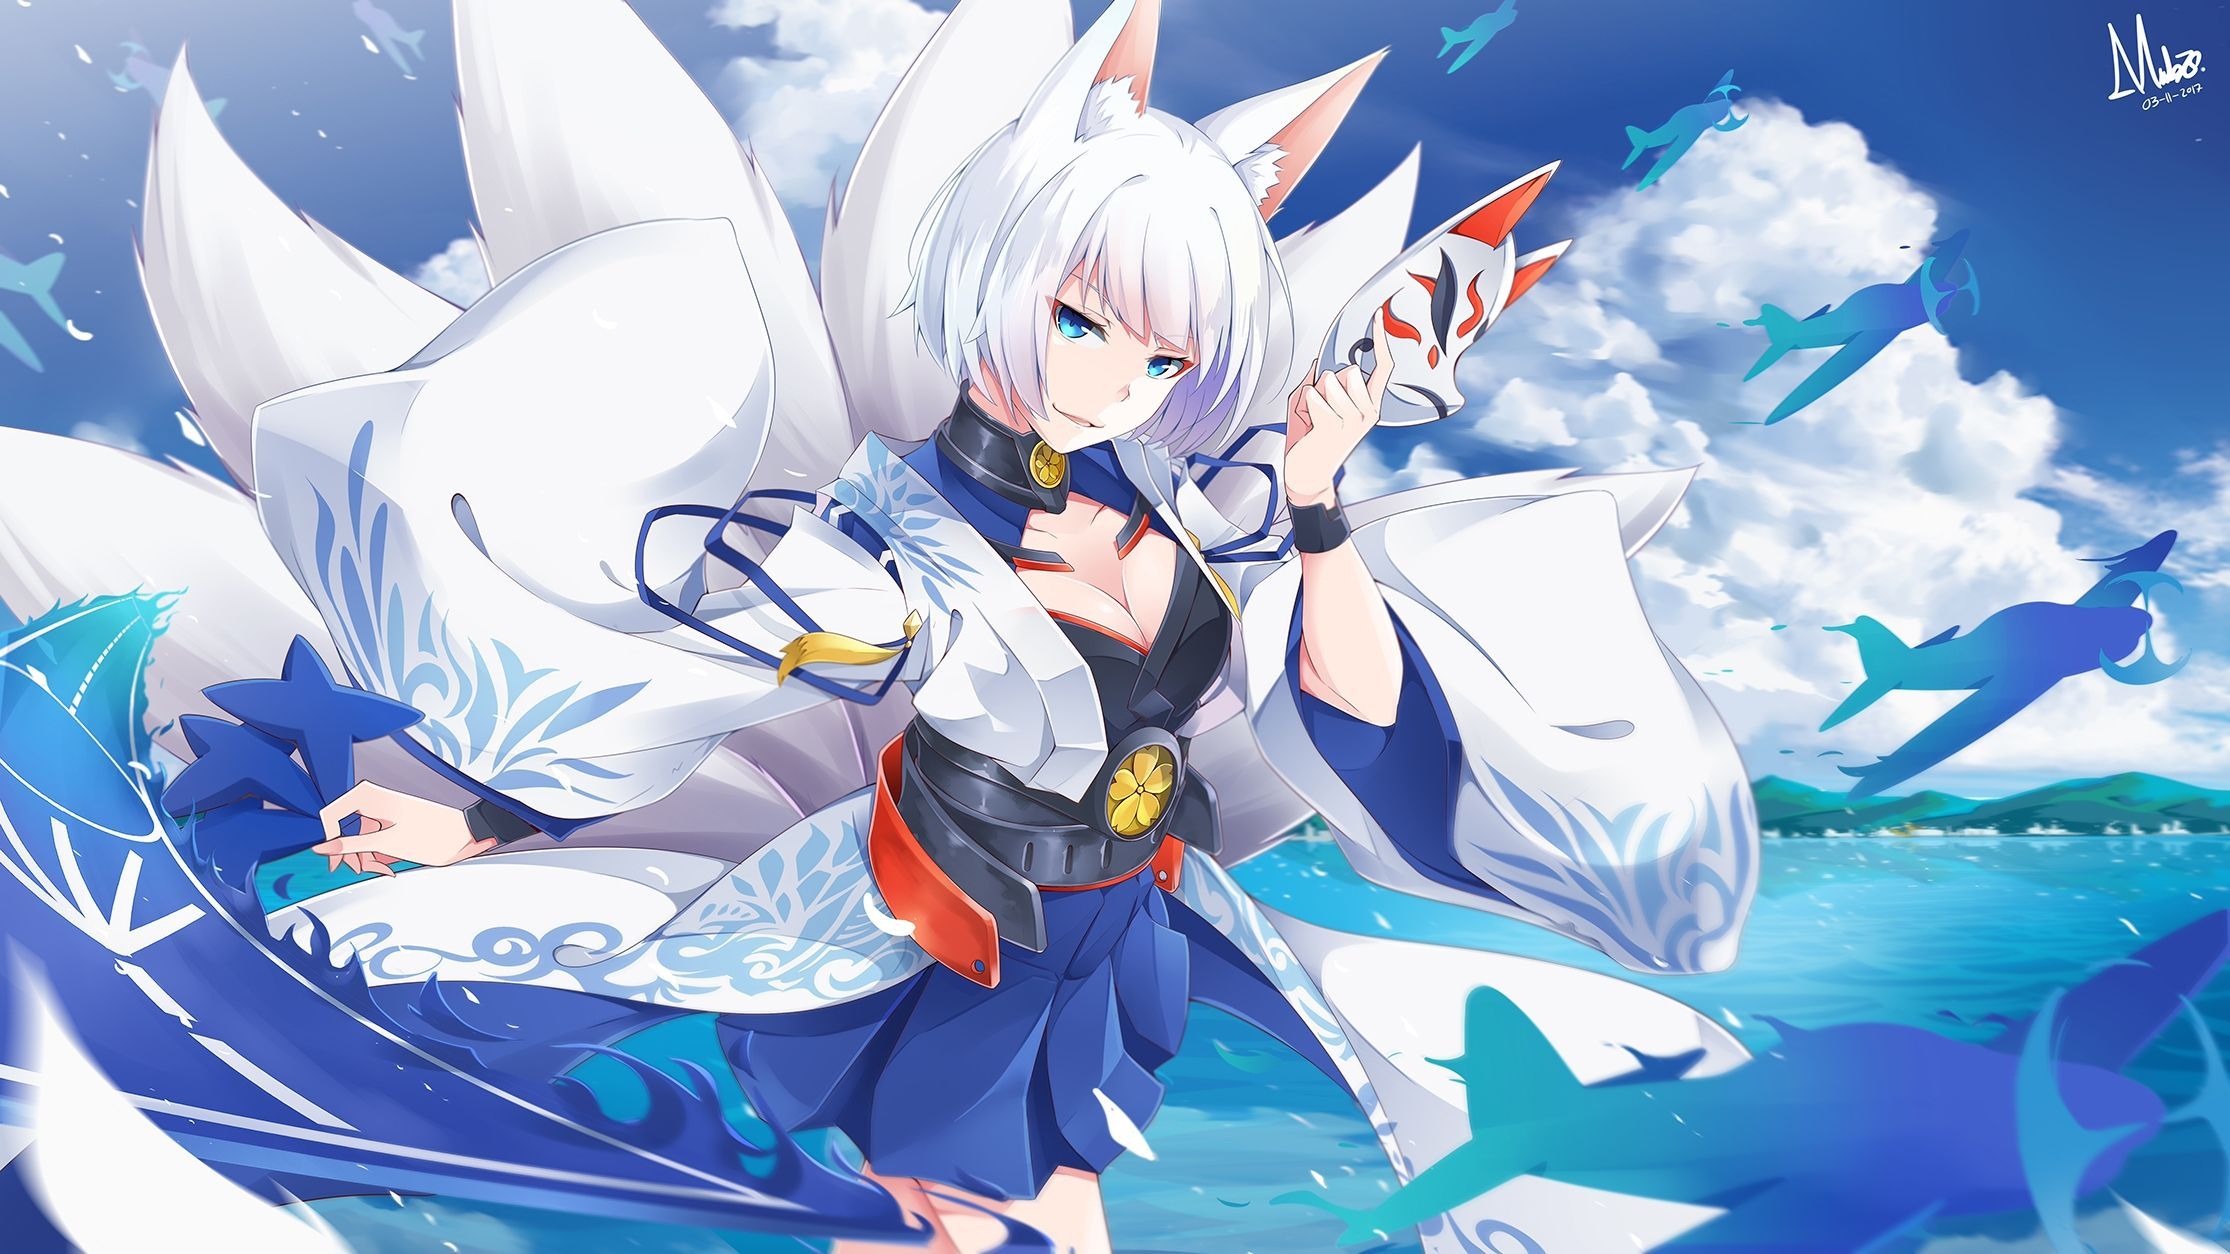 An anime foxgirl with long white hair and green eyes | Stable Diffusion